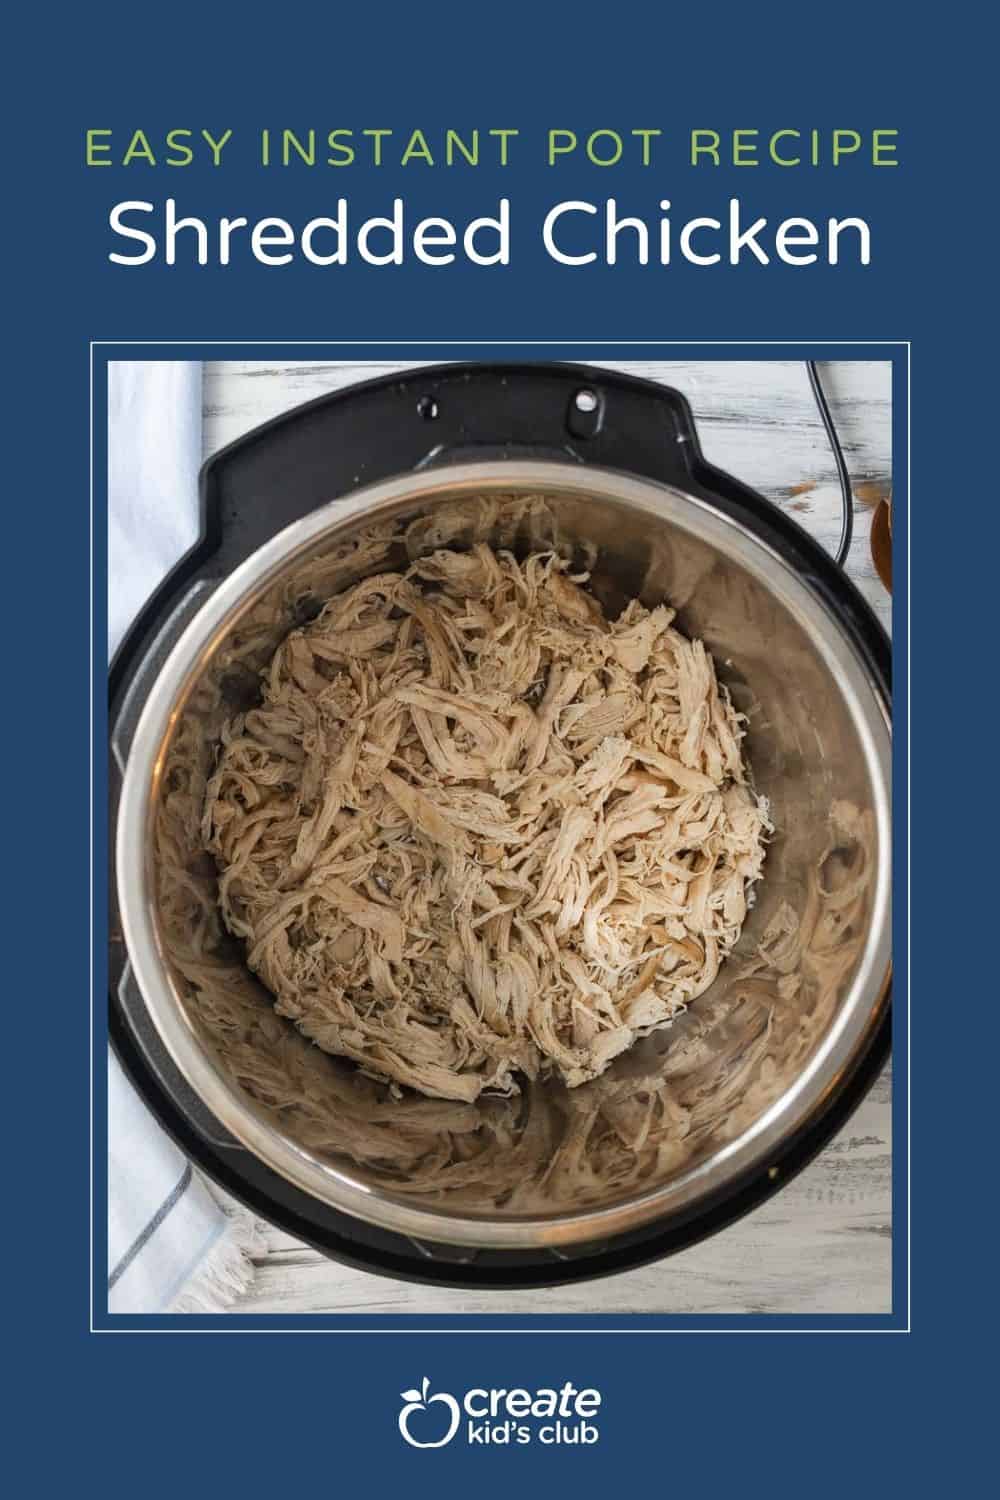 Pin showing shredded chicken in an instant pot.